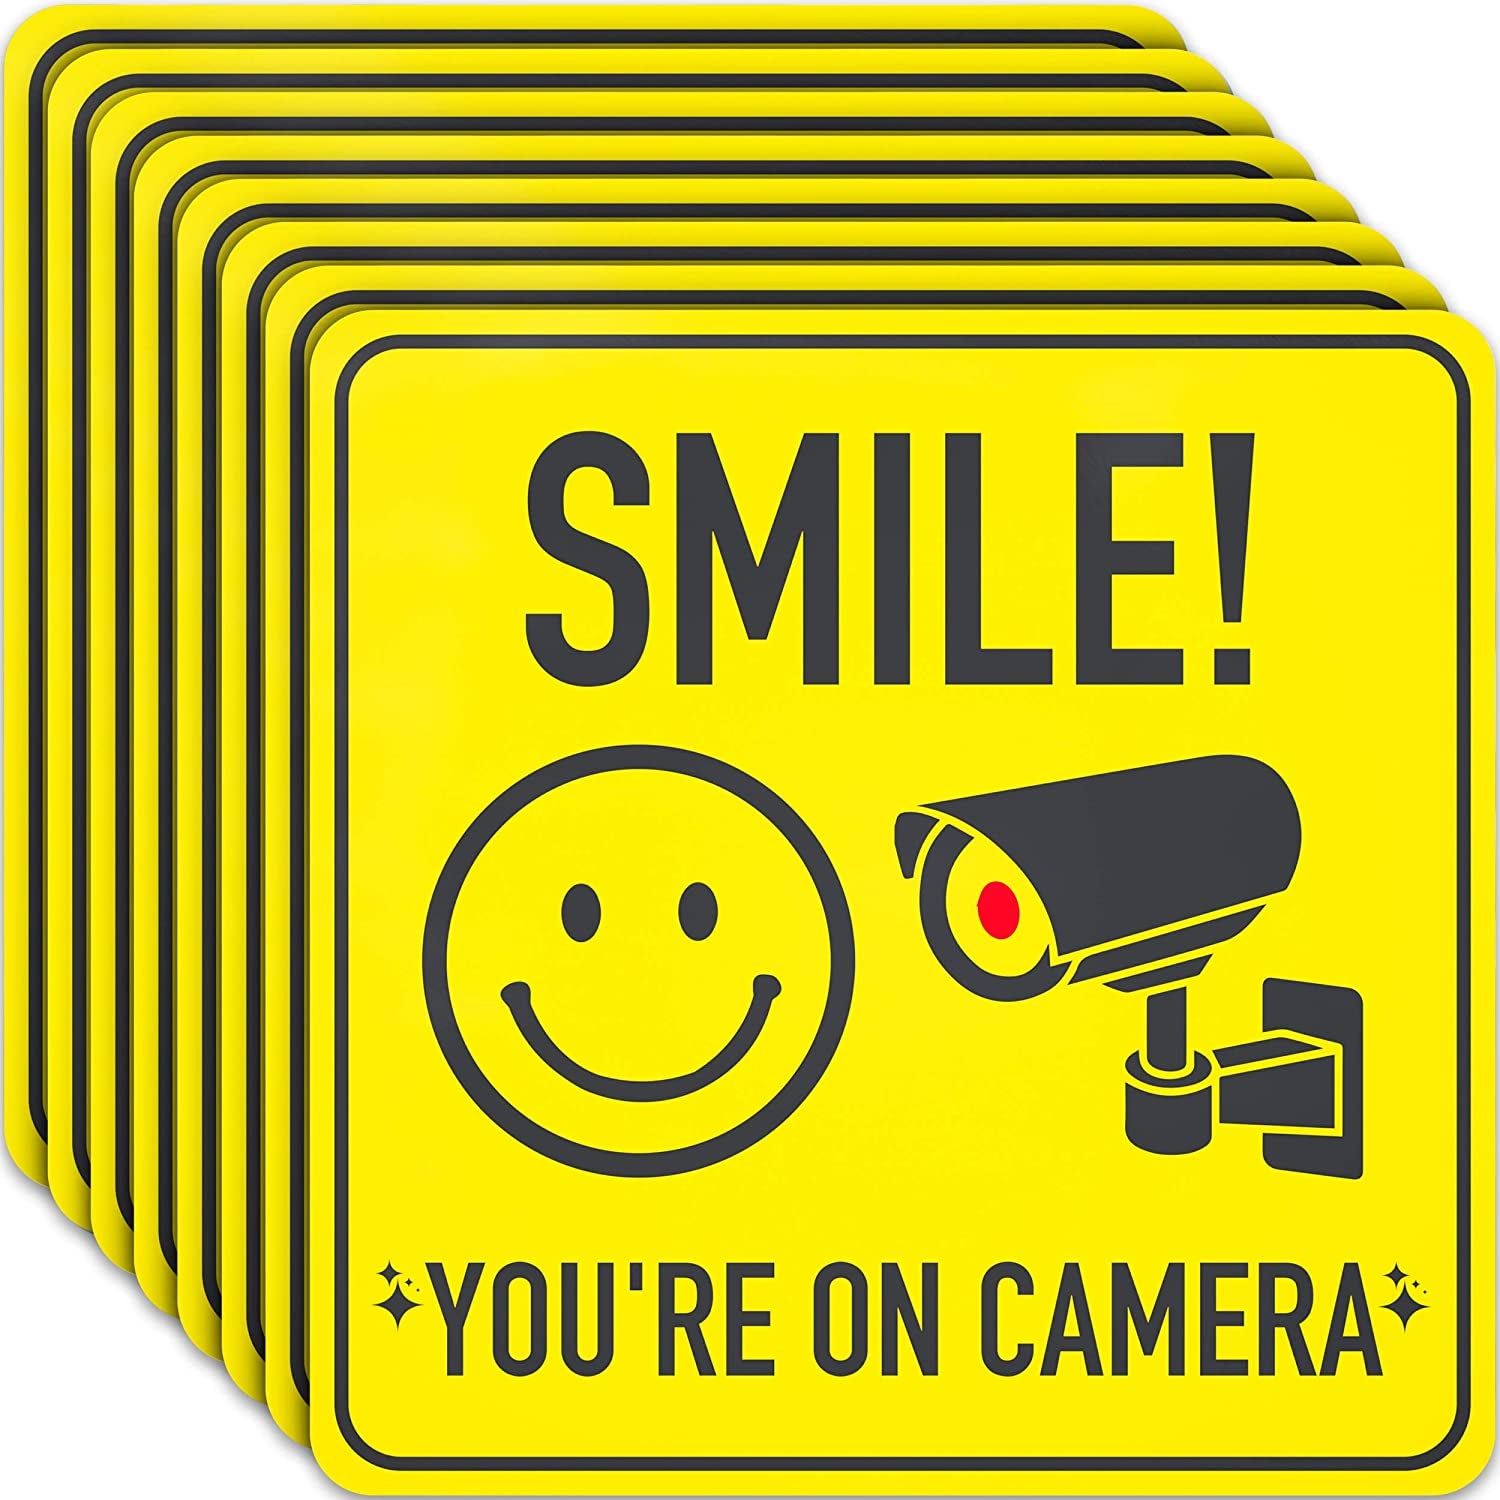 ASSURED SIGNS, Smile You'Re on Camera Sign Stickers - 7 X 7 Inch - 8 Pack - Polite Video Surveillance Signs to Prevent Trespassing on Private Property - Perfect for House, Business, Yard or Private Driveway